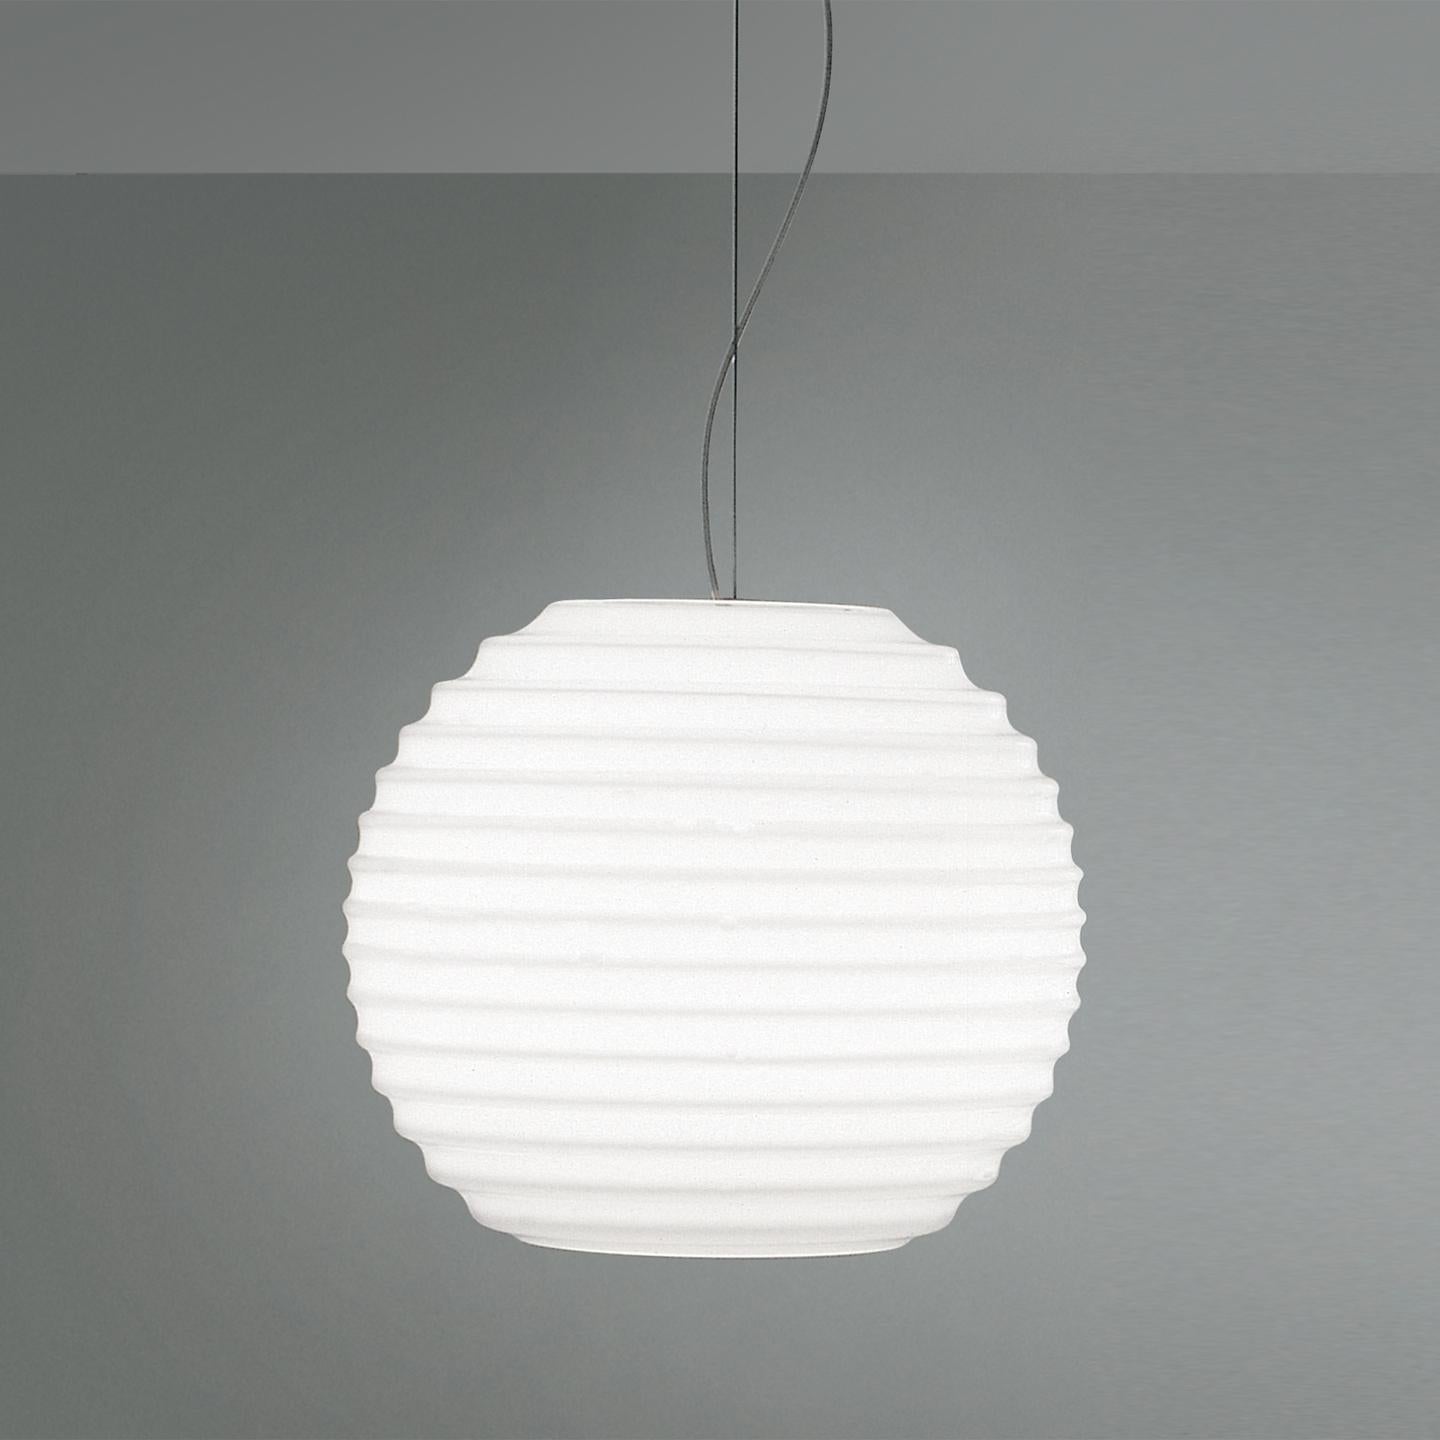 Toso, Massari & Associates designed Modulo Pendant in 1998 to be a beautiful lamp that exploited Murano traditions of blowing ribbed glass. The effect is a burst of light that provides diffused and direct light. The clear outer bands of the rims are